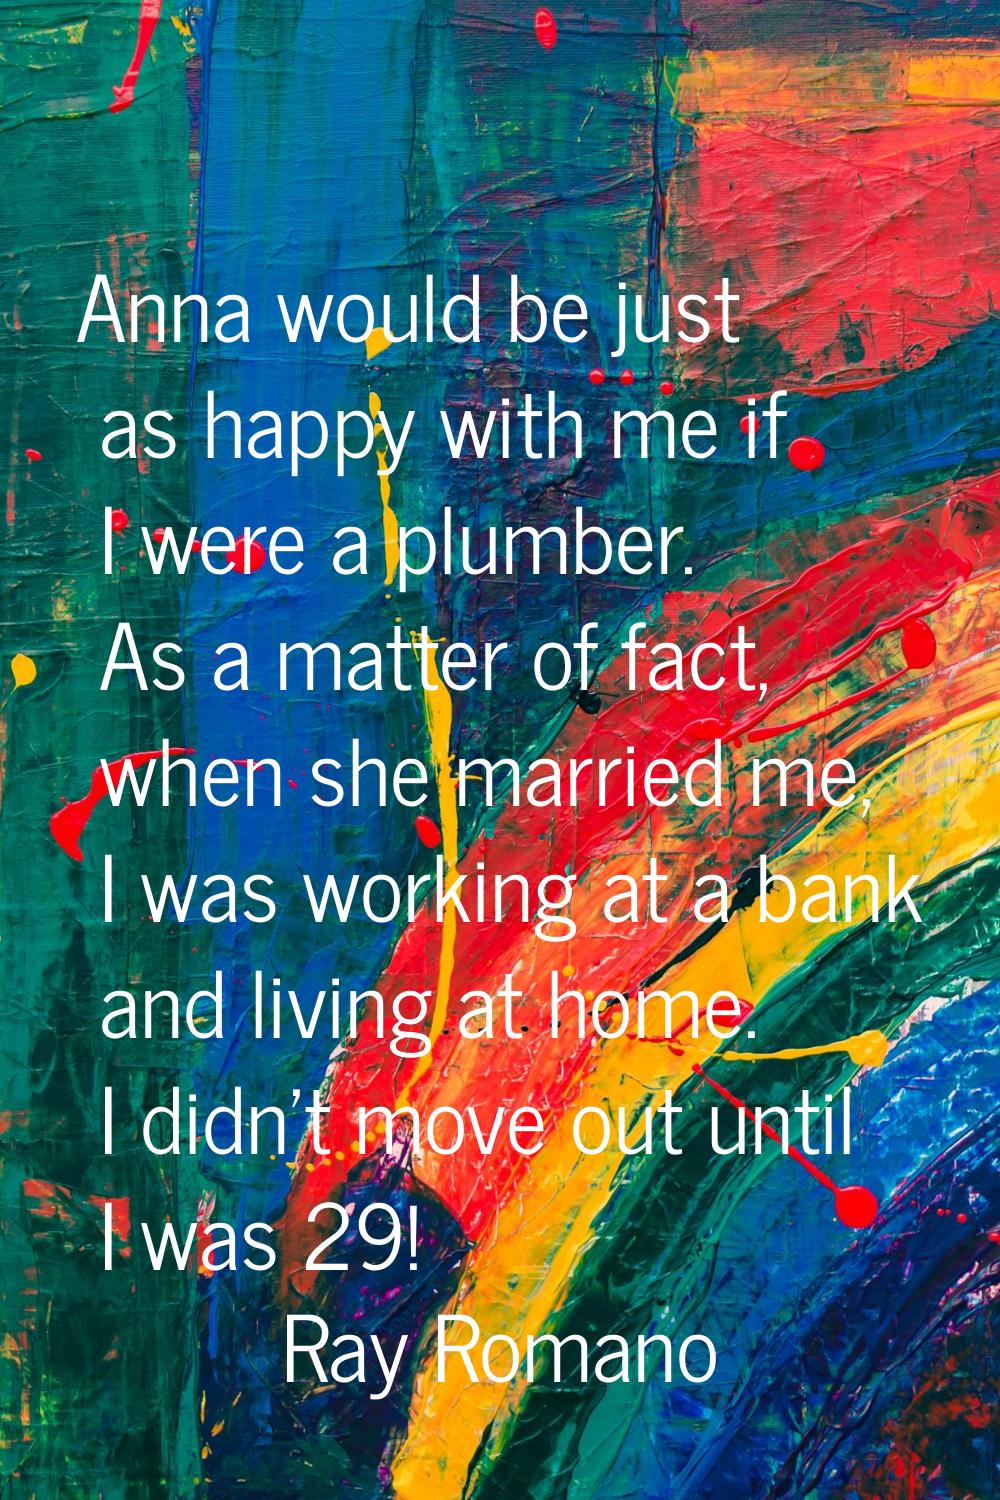 Anna would be just as happy with me if I were a plumber. As a matter of fact, when she married me, 